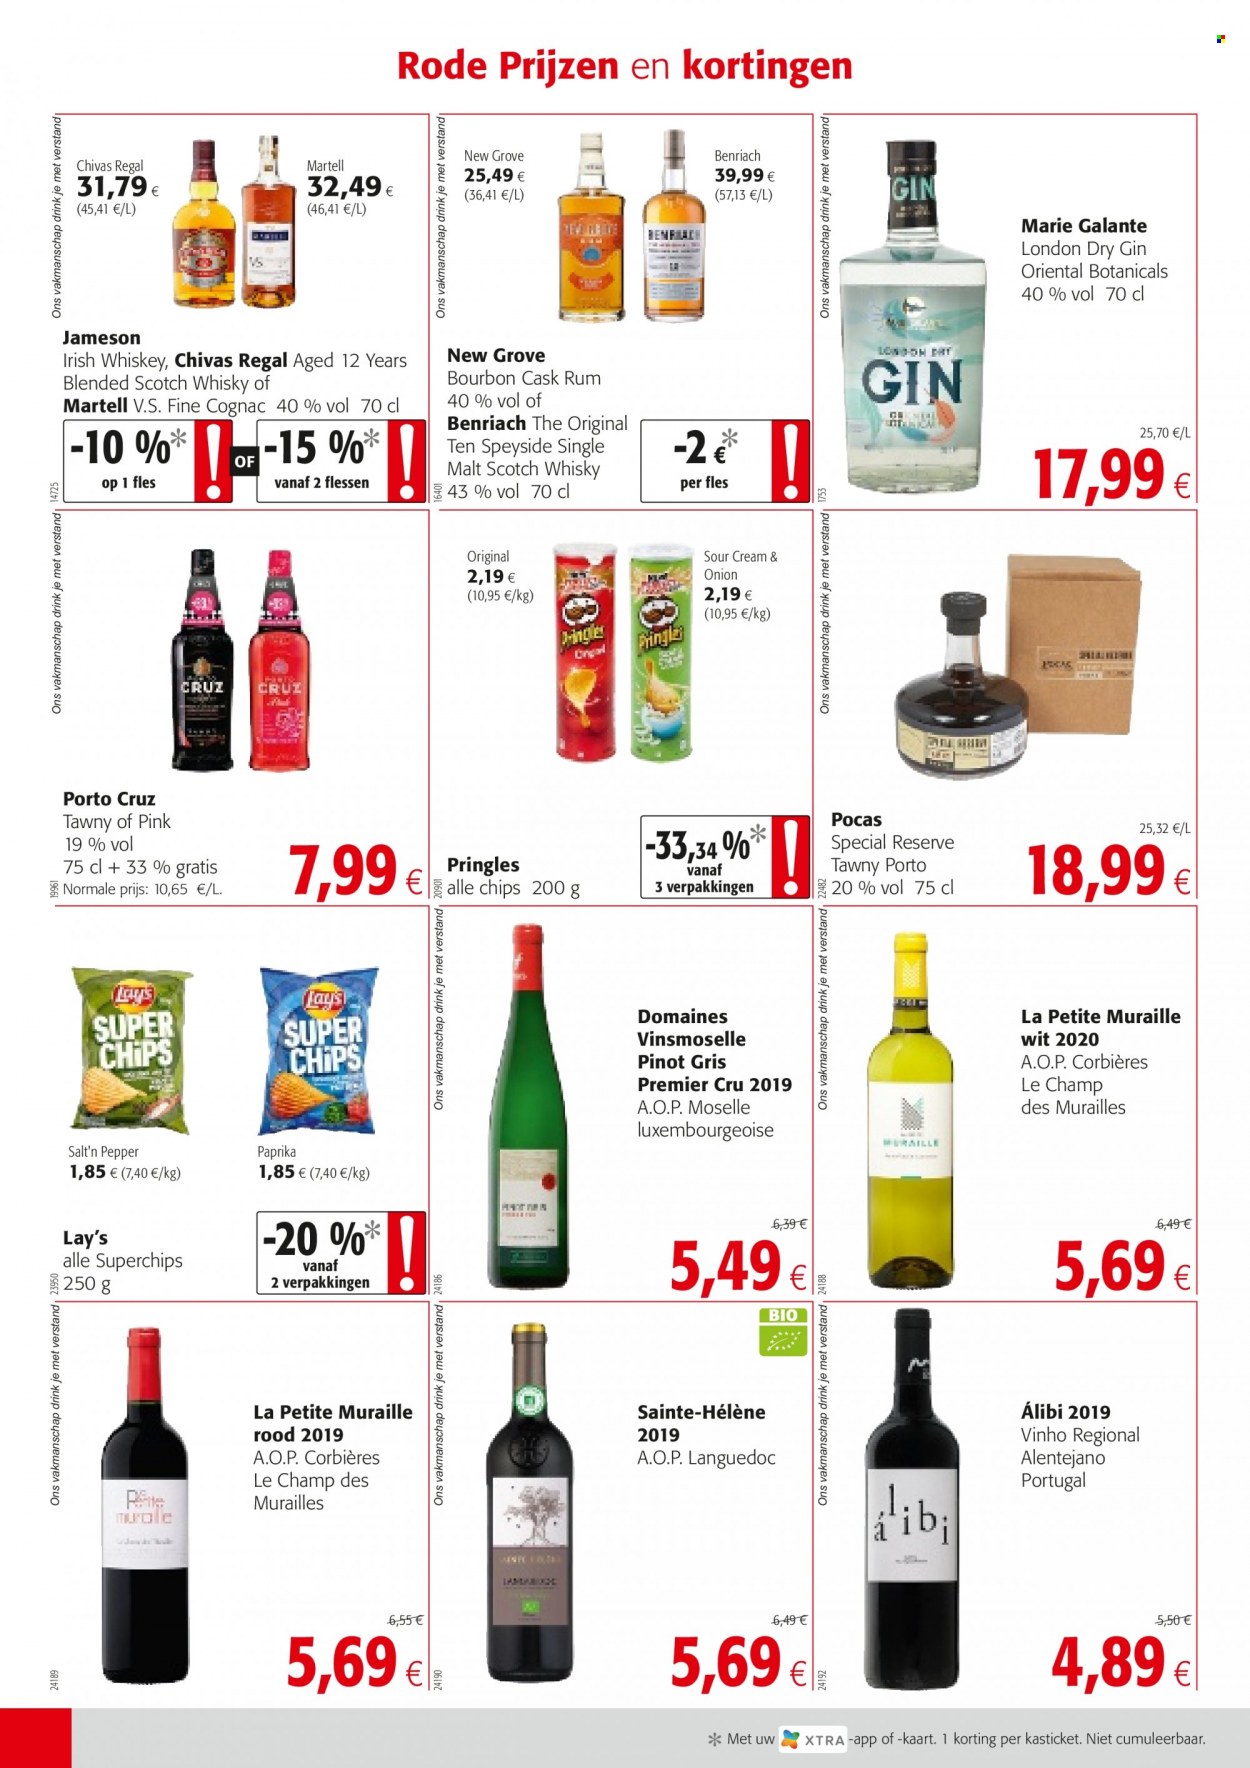 thumbnail - Colruyt-aanbieding - 17/11/2021 - 30/11/2021 -  producten in de aanbieding - Pringles, chips, Pinot Griggio, blended scotch whisky, Bourbon, rum, Jameson, London Dry Gin, scotch whisky, Single Malt, cognac, porto, whiskey, whisky, gin. Pagina 2.